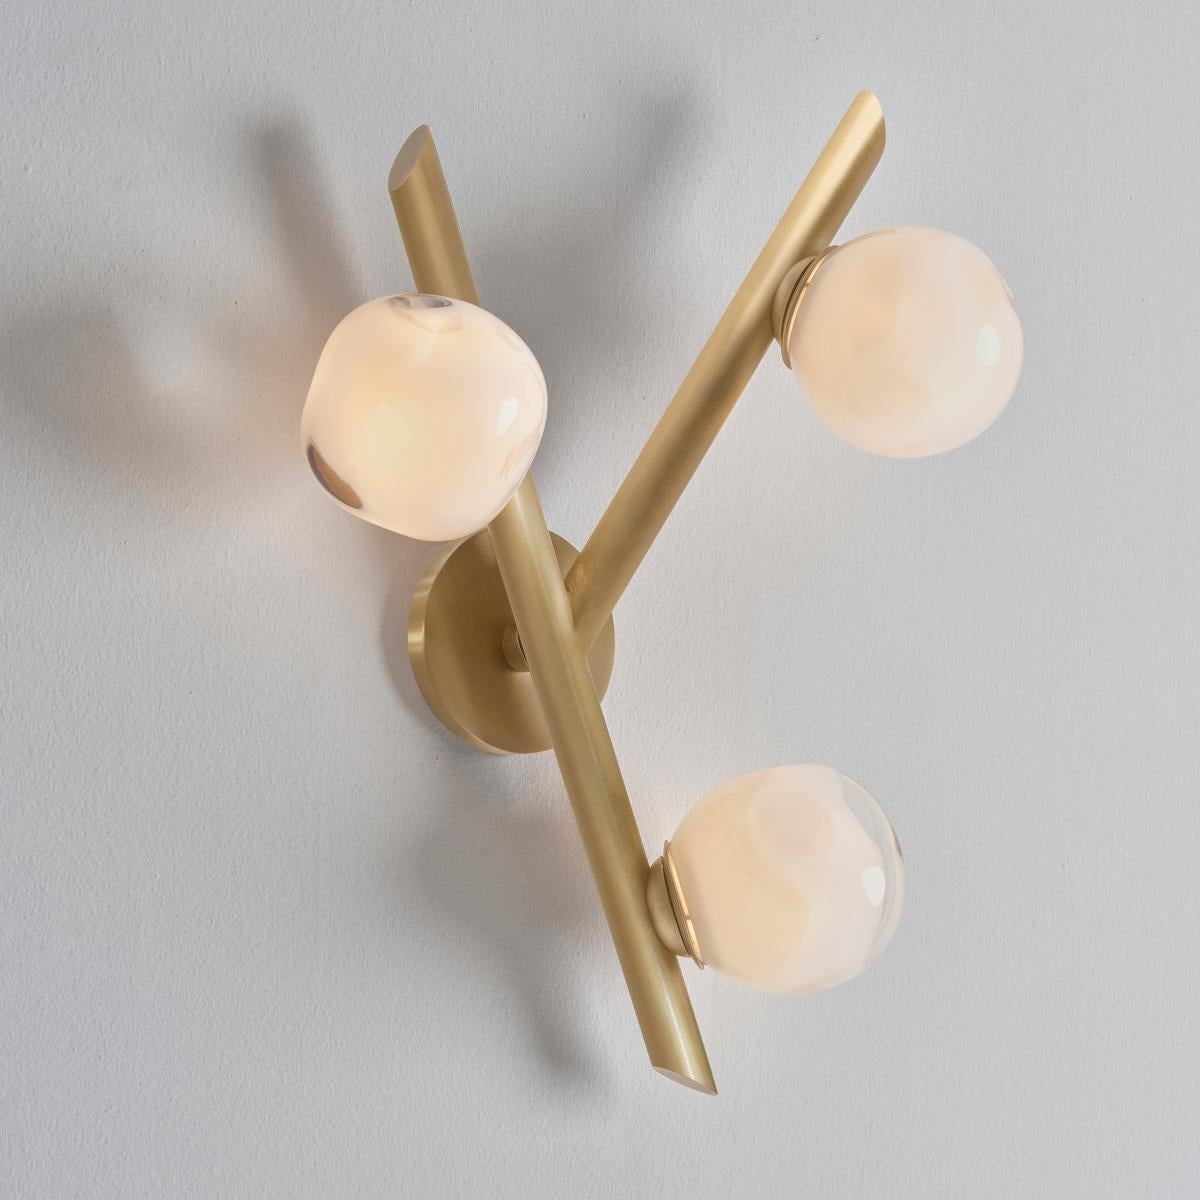 Brass Antares Wall Light by Gaspare Asaro- Sand White Finish For Sale